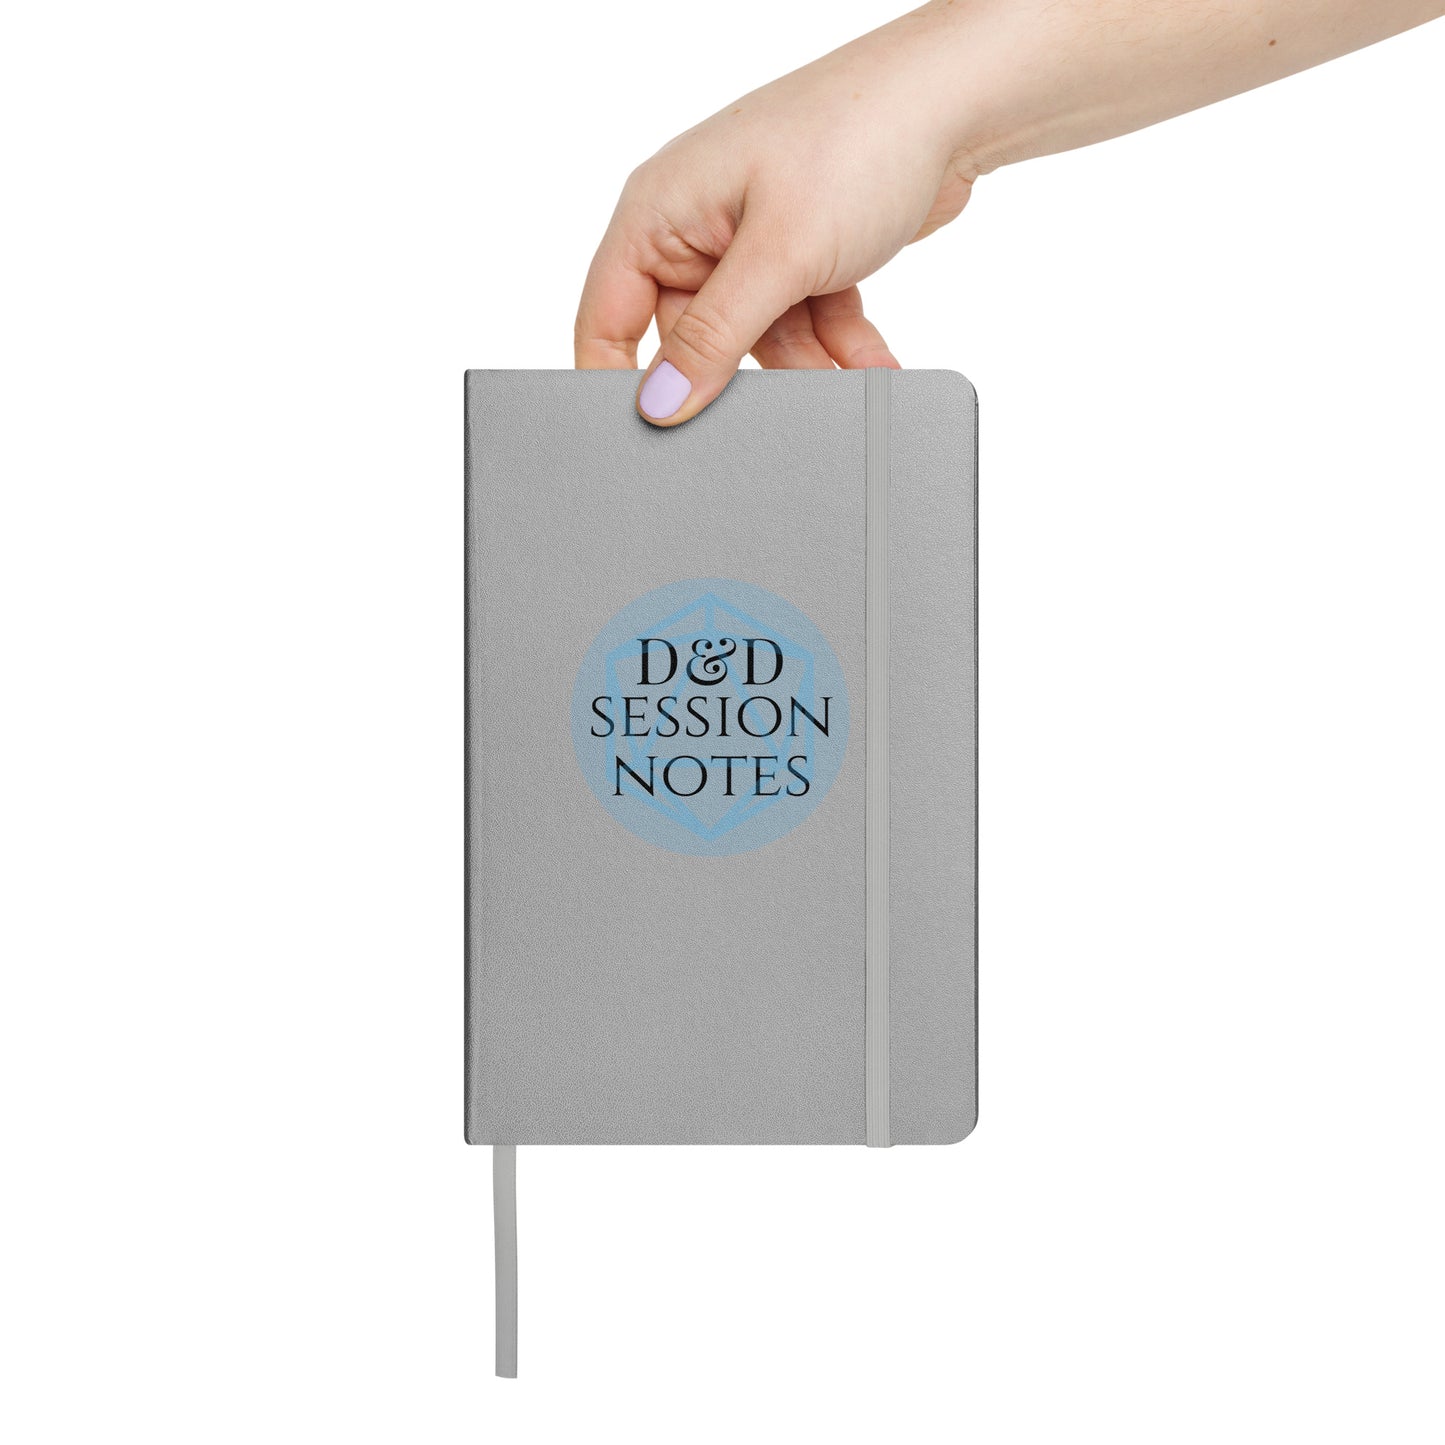 D&D Session Notes Hardcover Bound Notebook